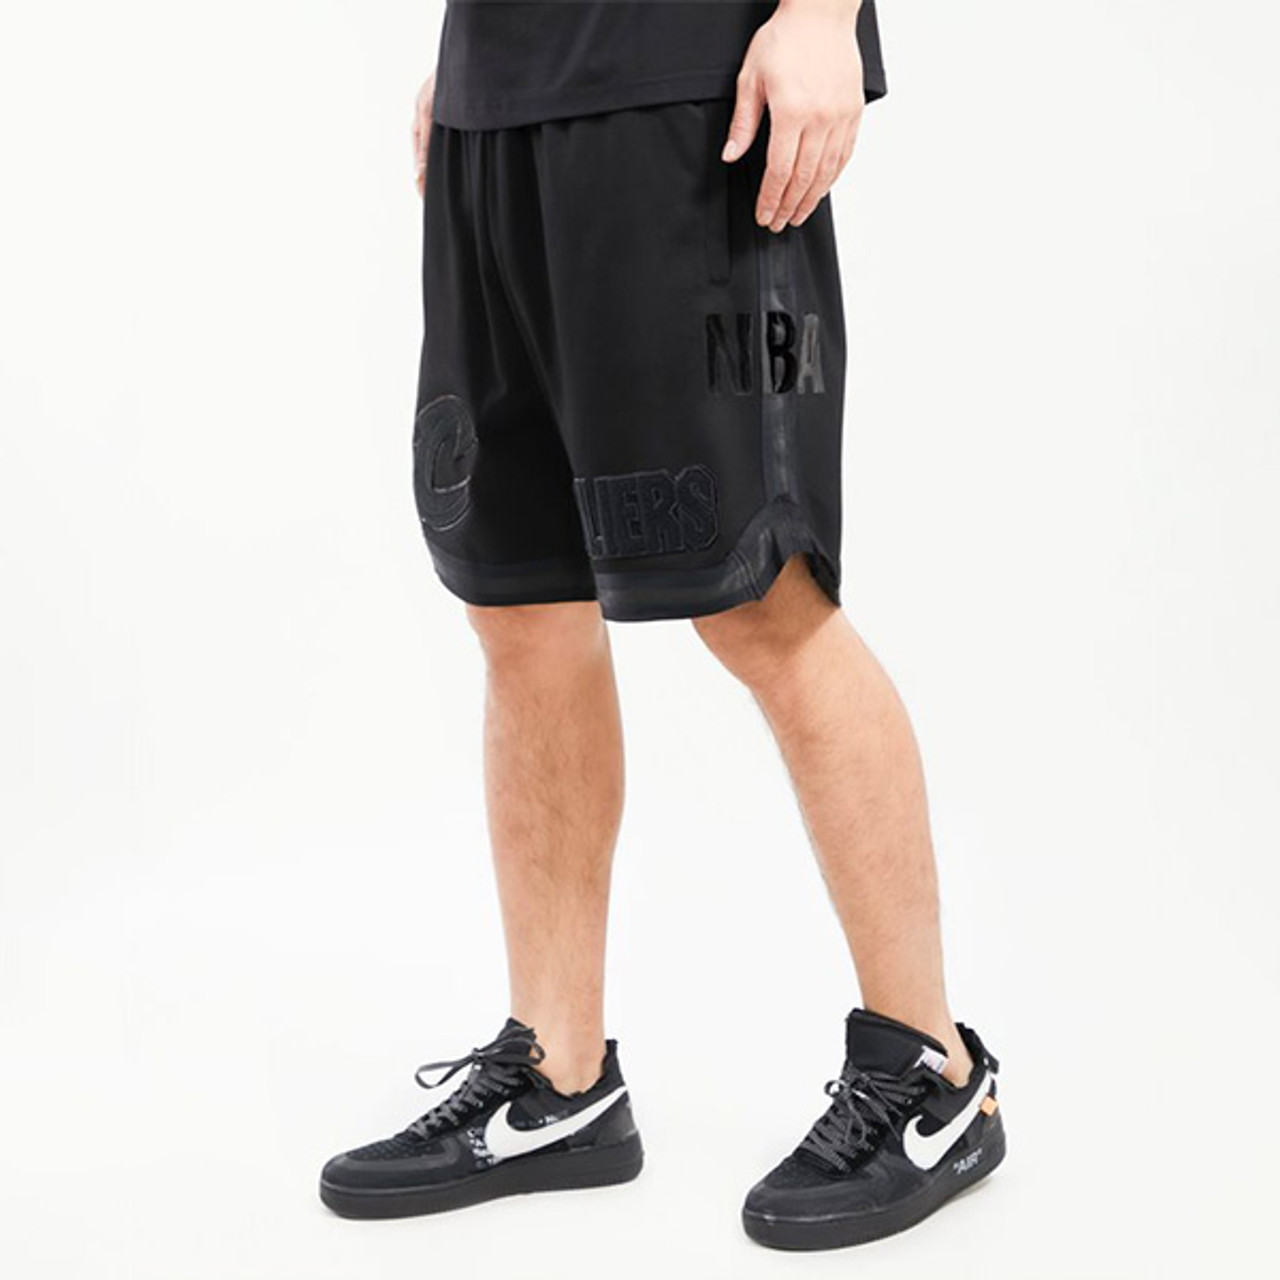 Official Cleveland Cavaliers Shorts, Basketball Shorts, Gym Shorts